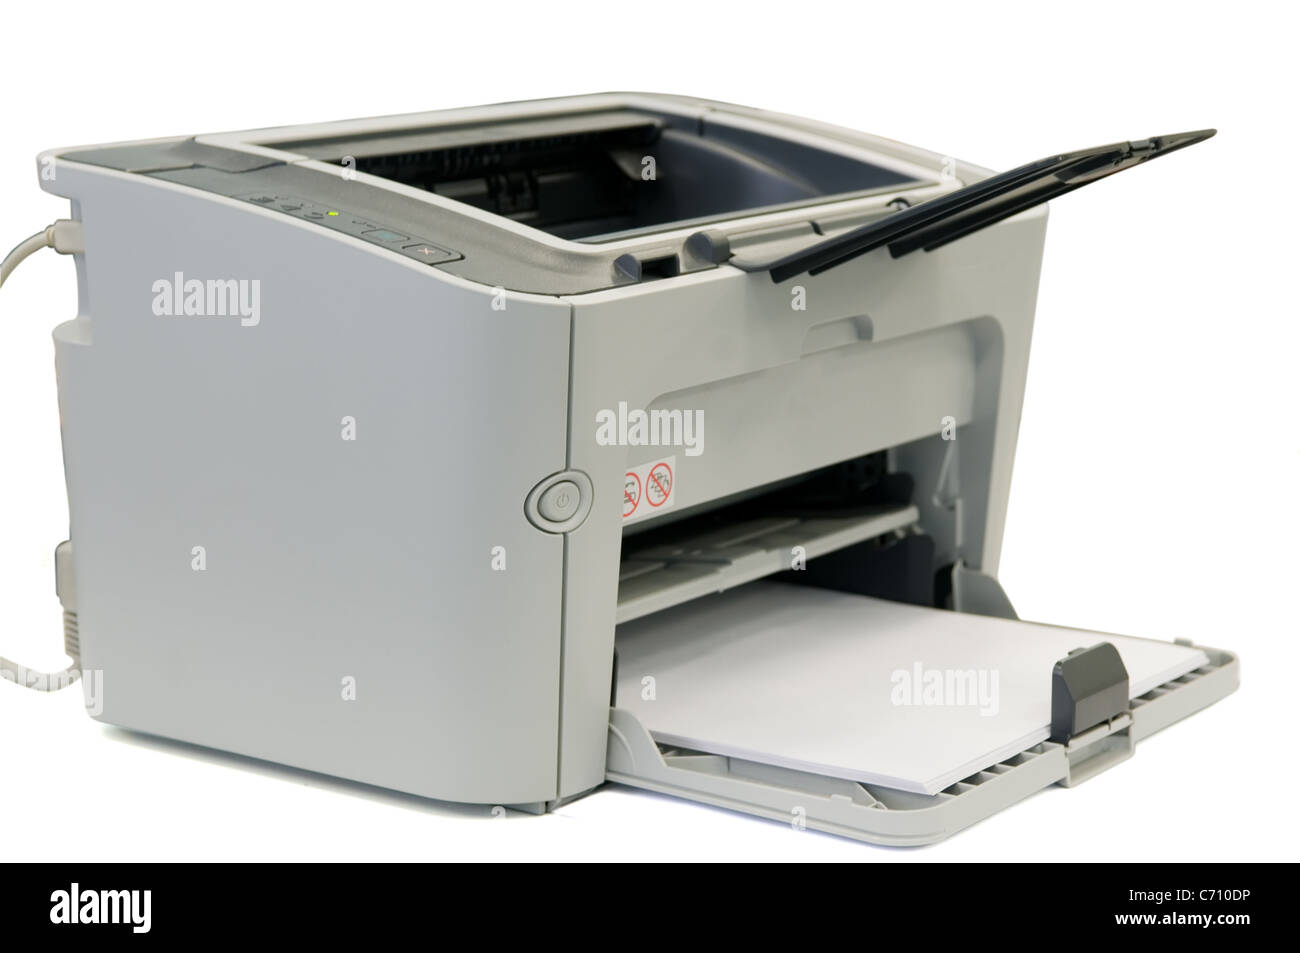 Office equipment printers Cut Out Stock Images & Pictures - Alamy